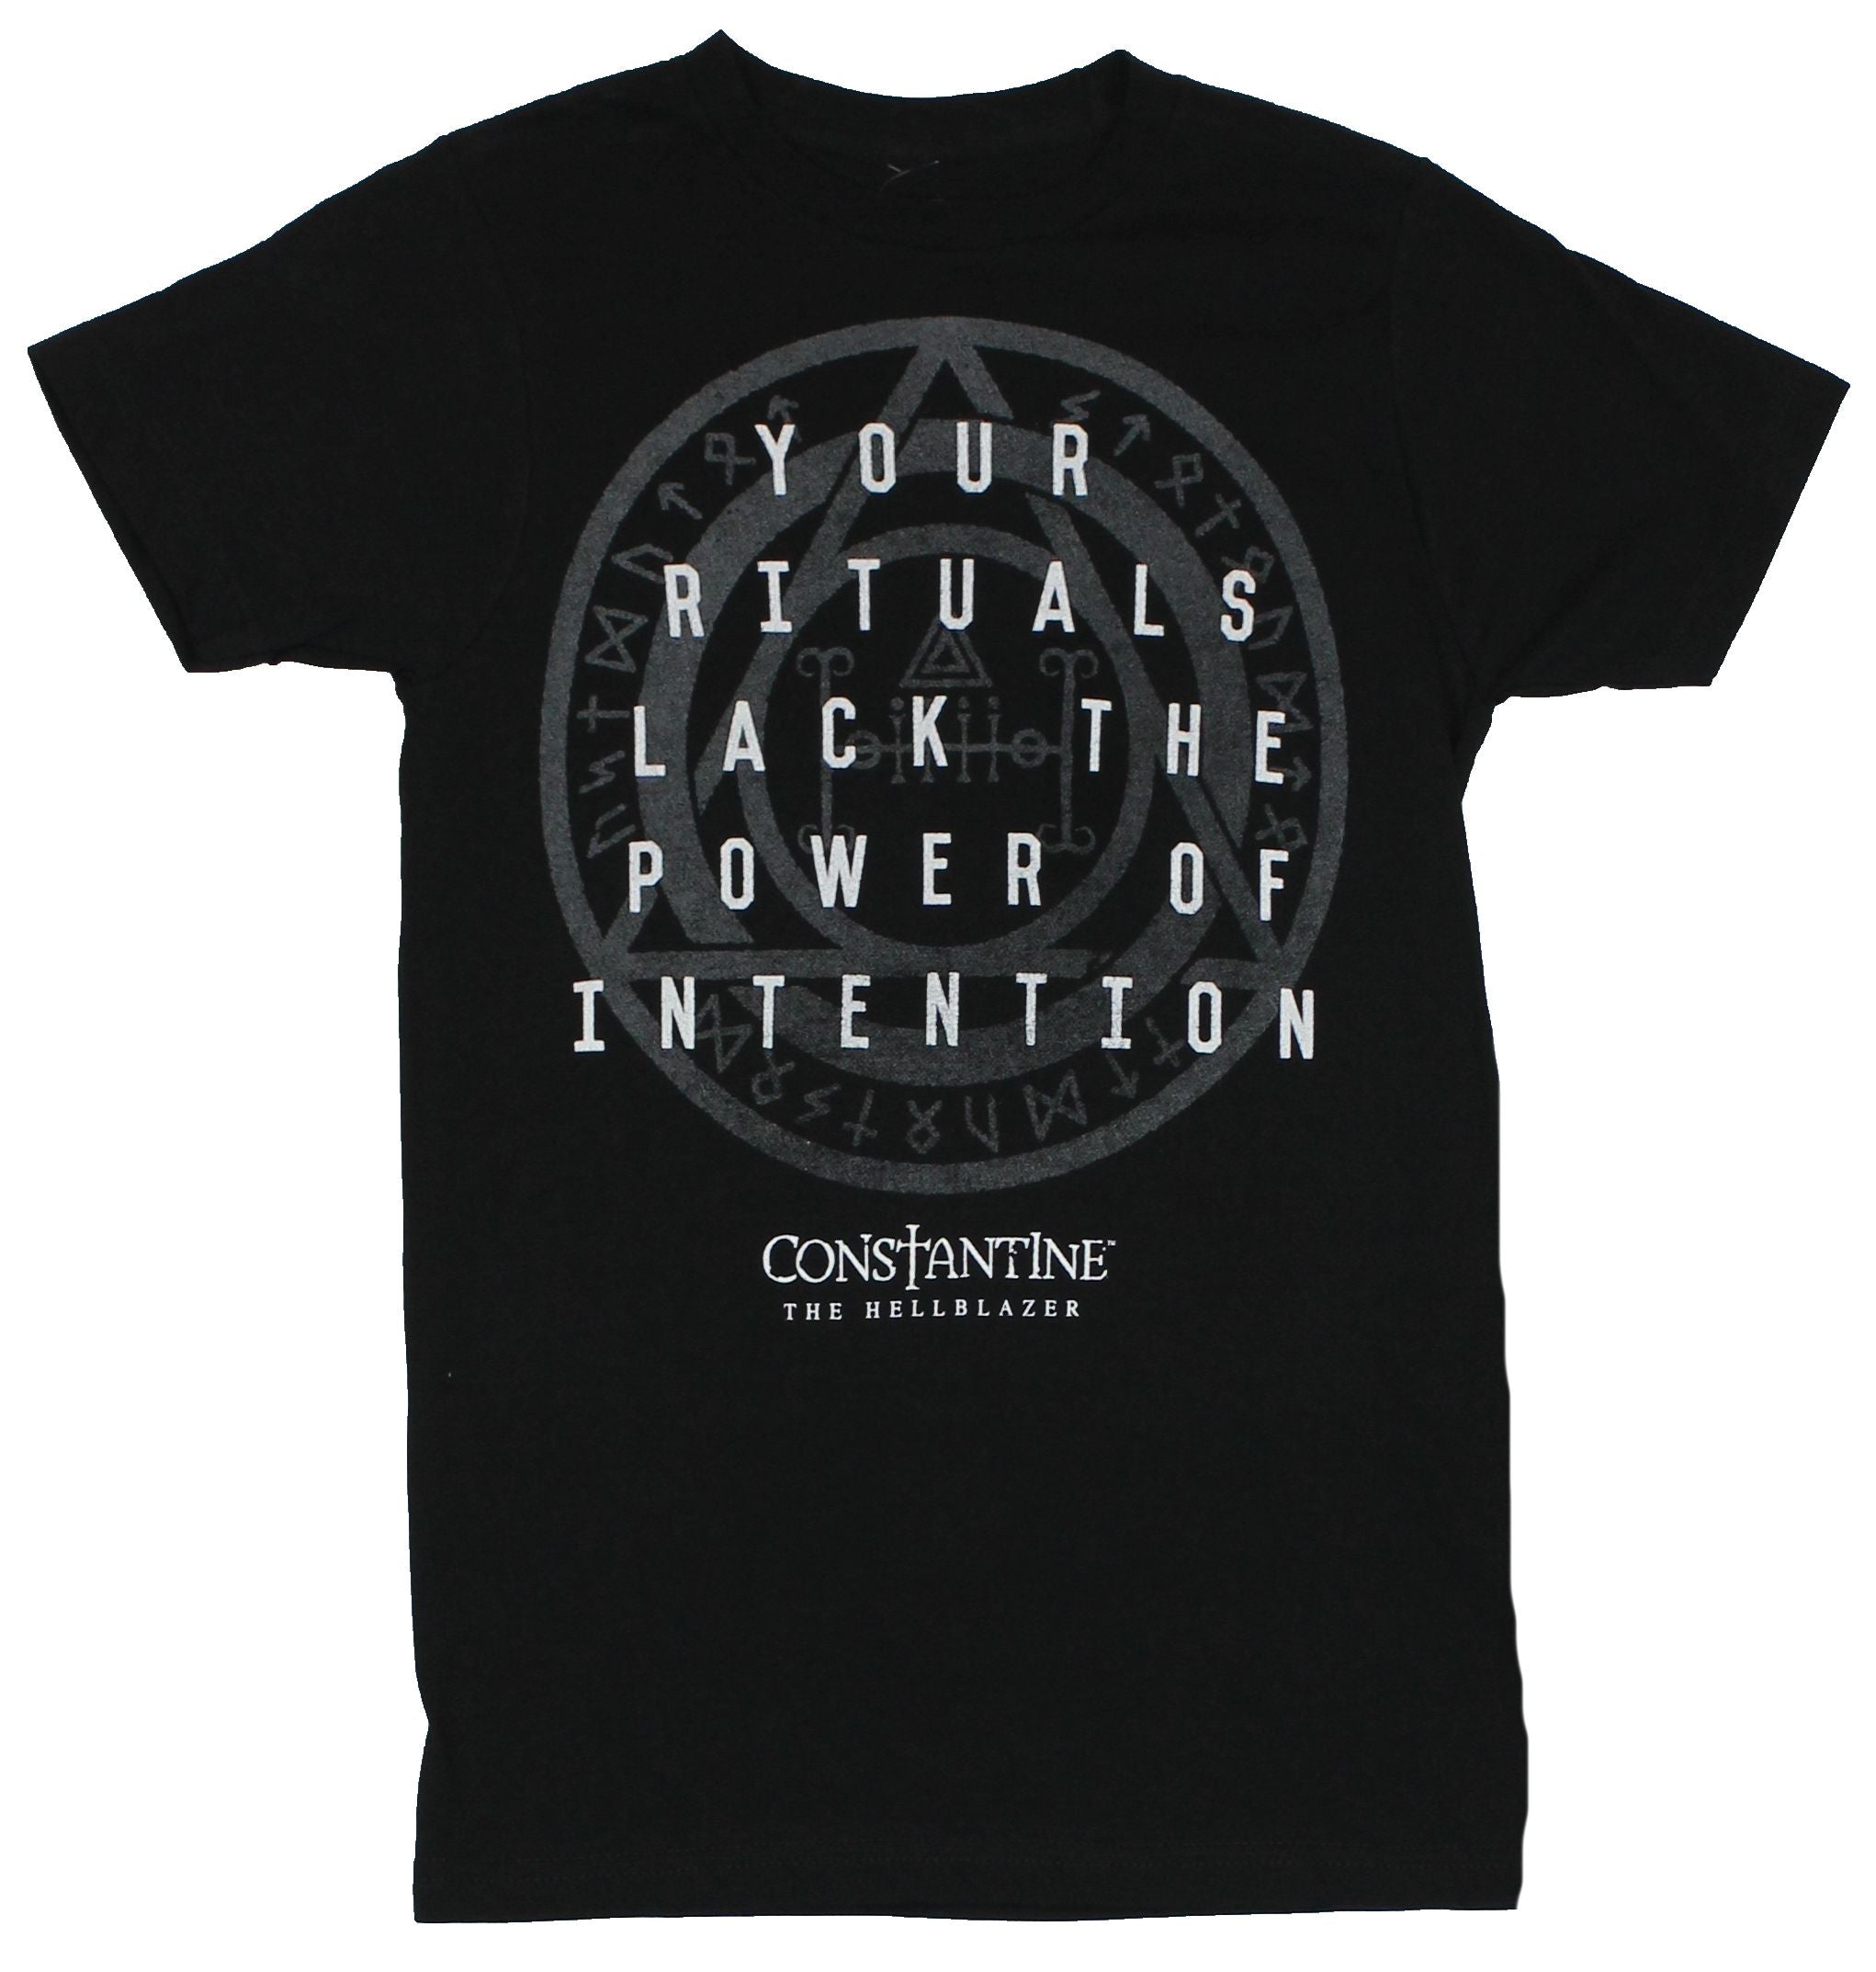 Constantine Mens T-Shirt - "Your Rituals Lack the Power Of Intention" Image